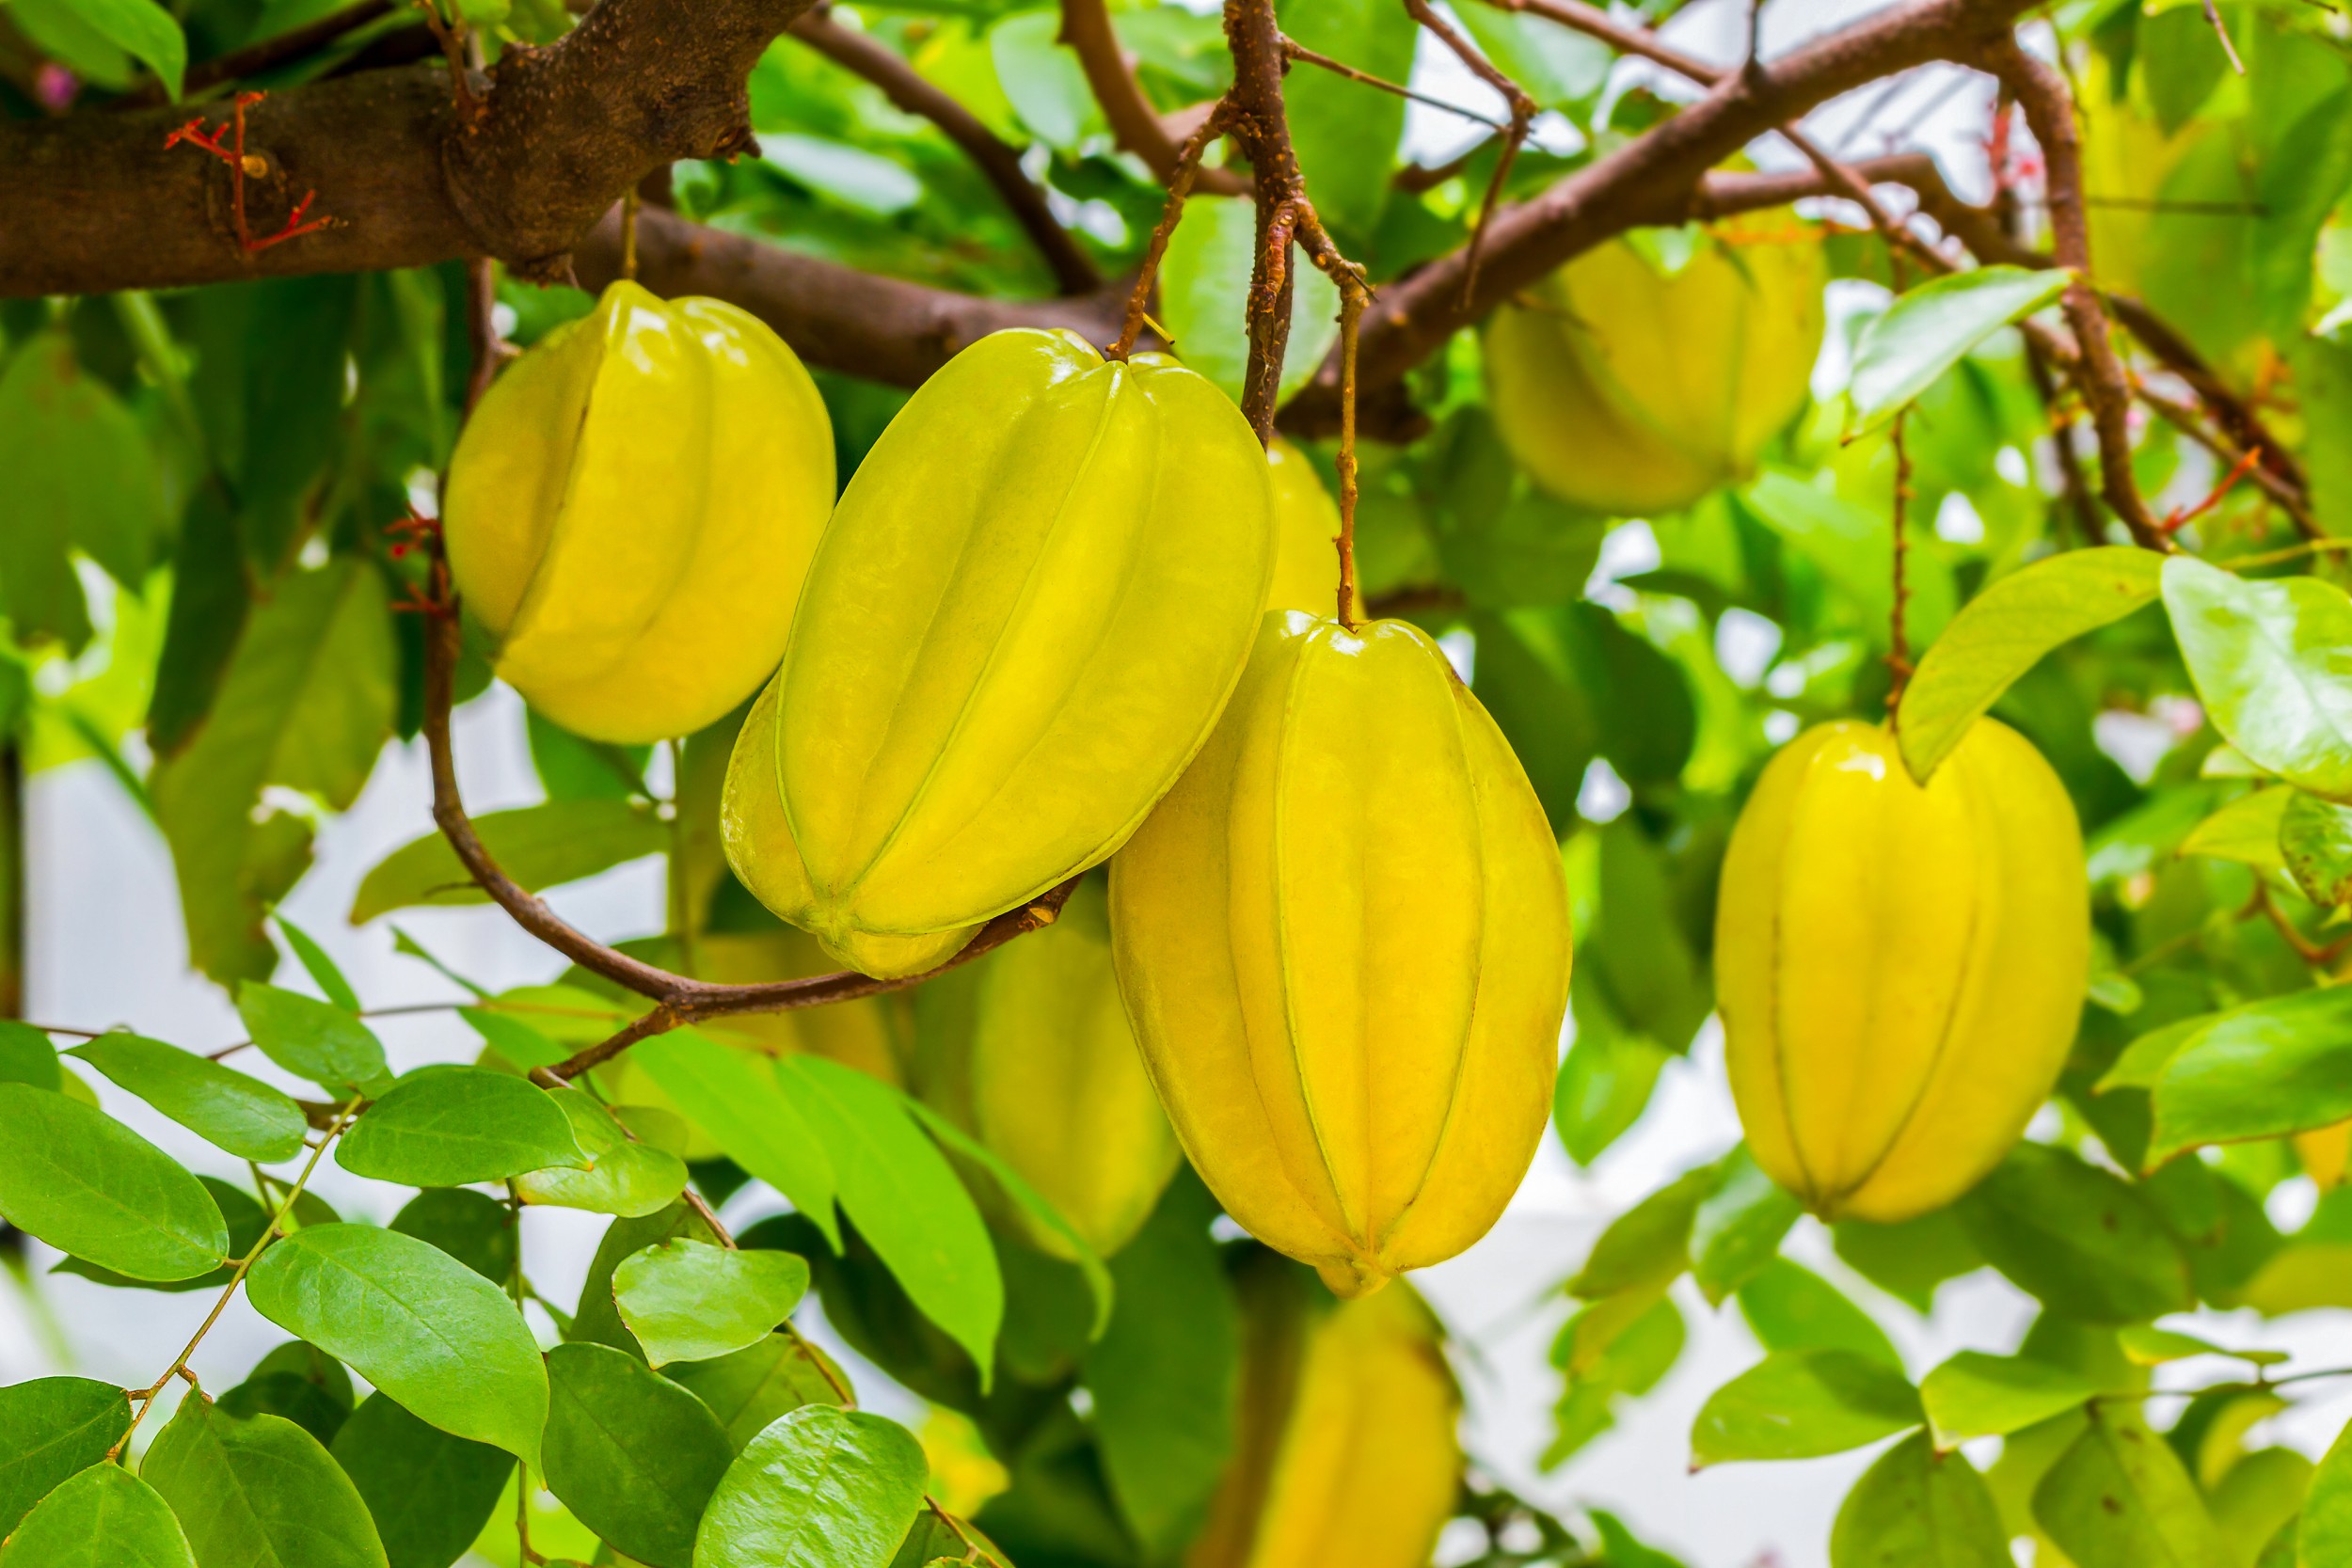 "Carambola: The Star of Good Health in Your Life"